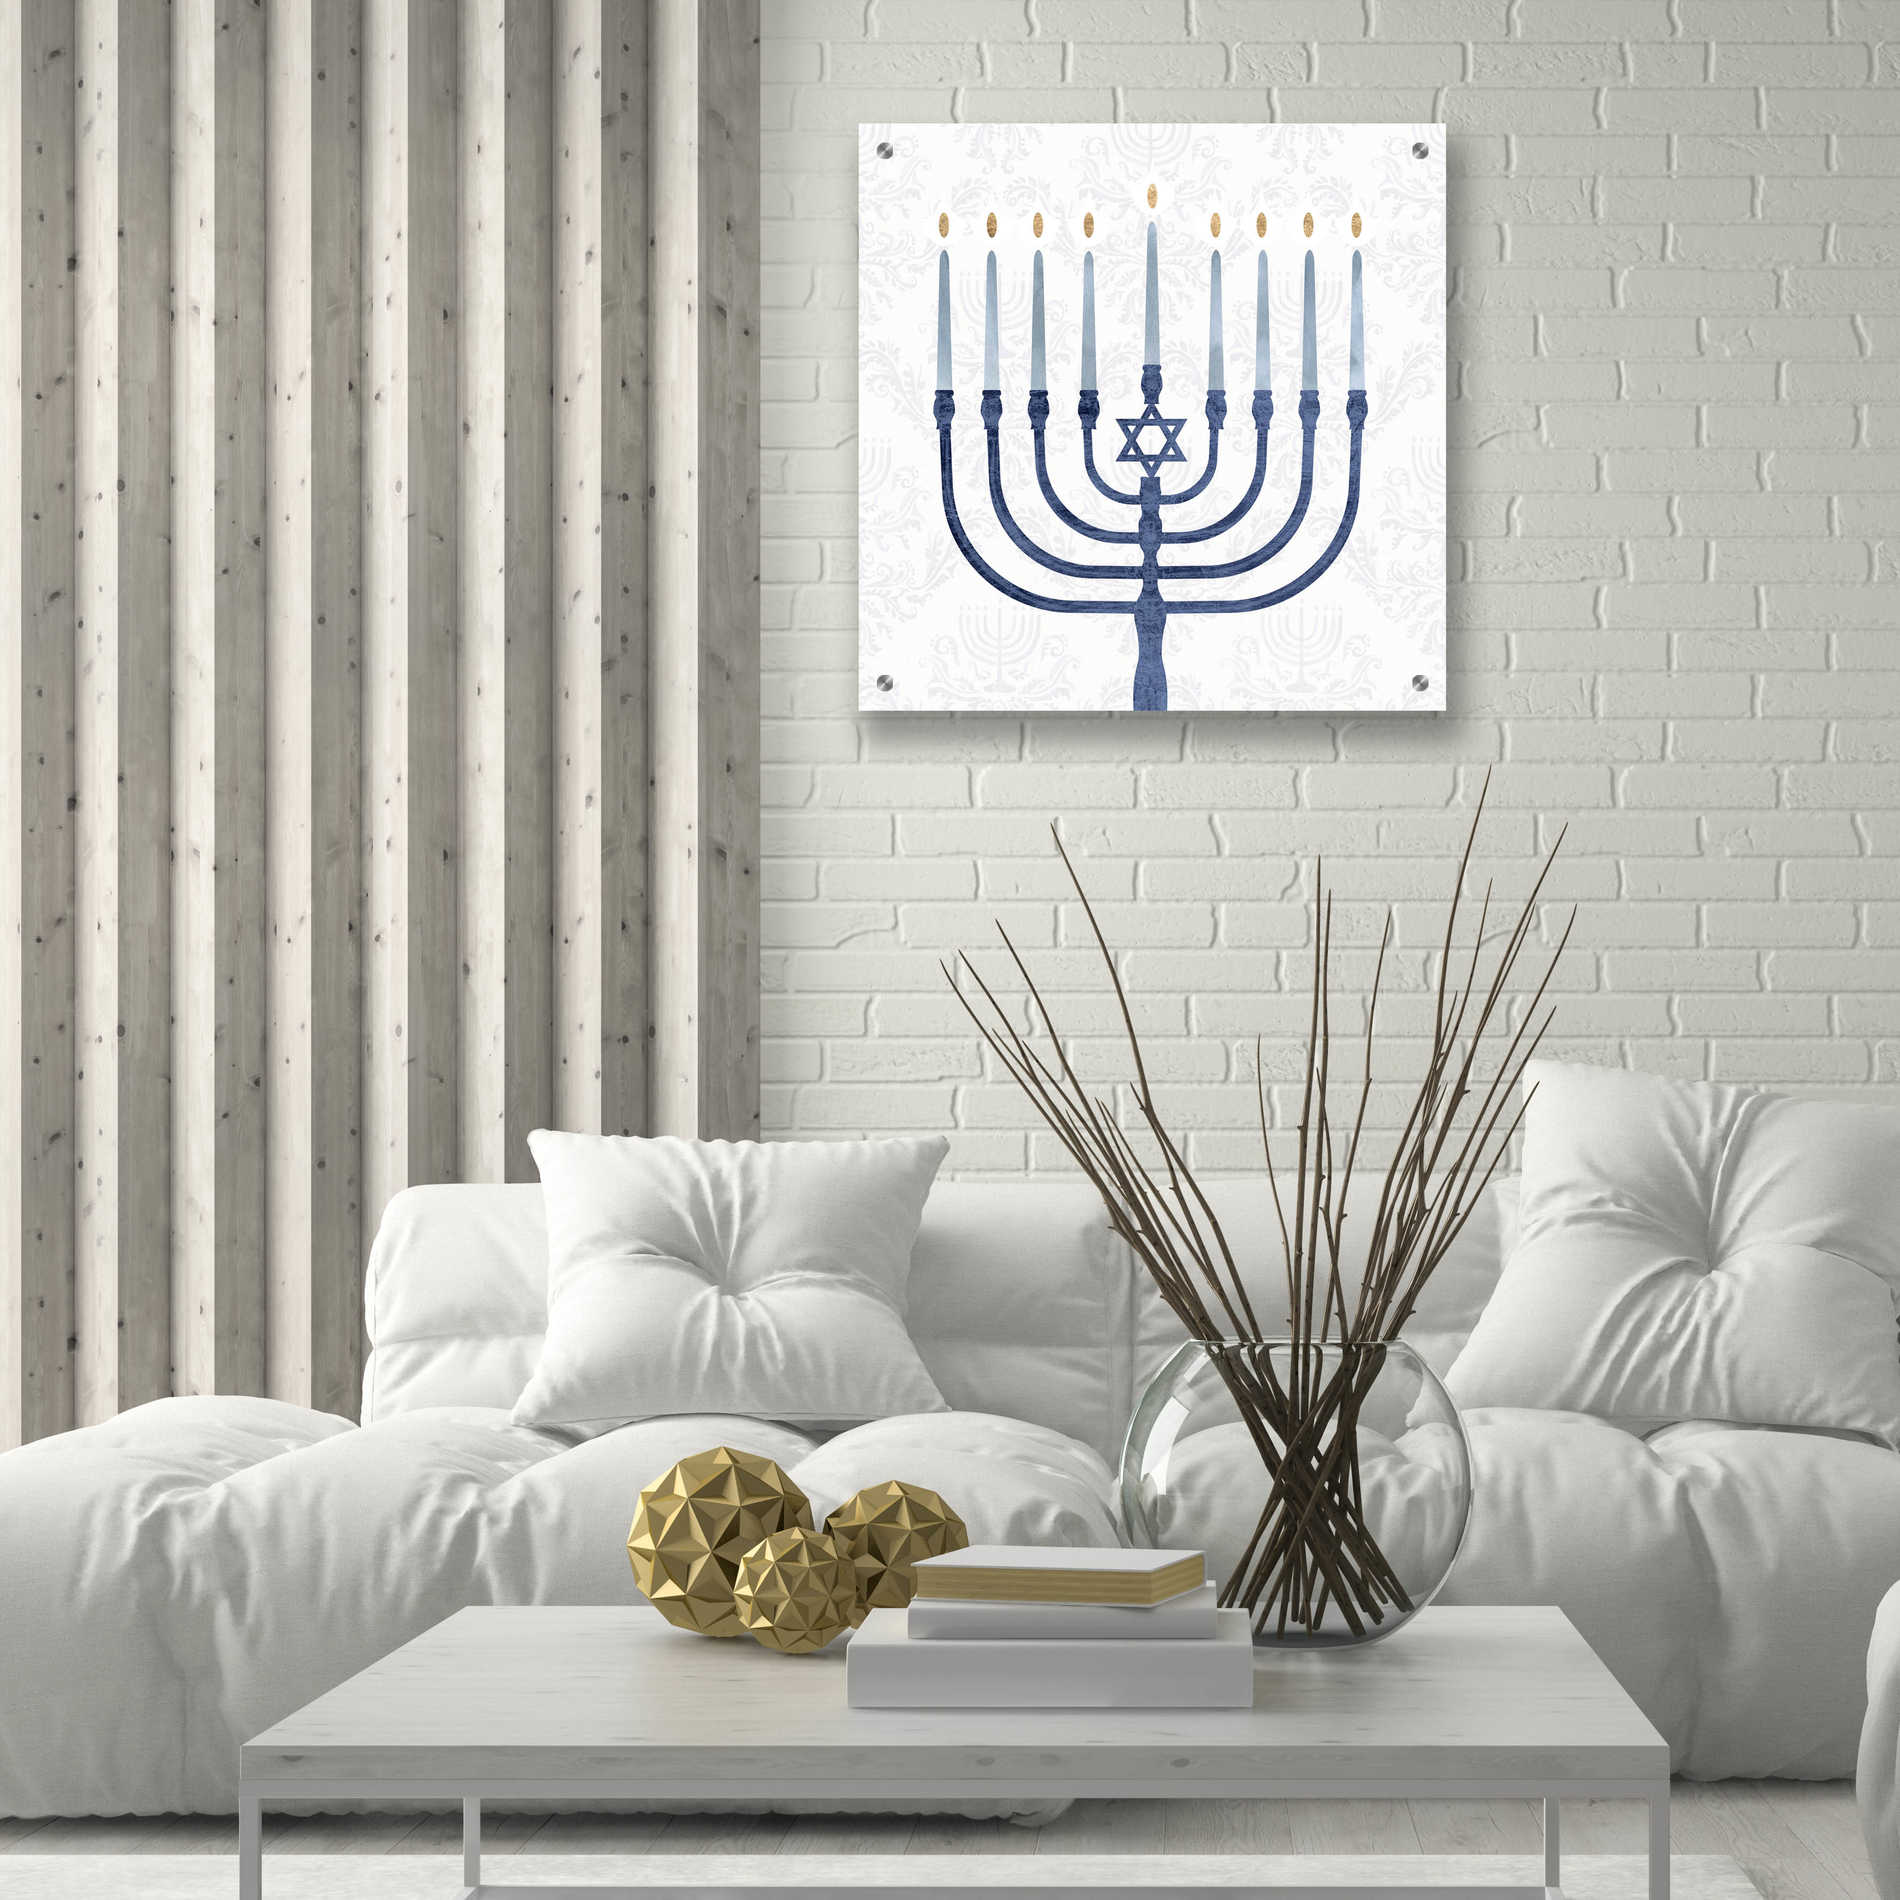 Epic Art 'Sophisticated Hanukkah II' by Victoria Borges, Acrylic Glass Wall Art,24x24